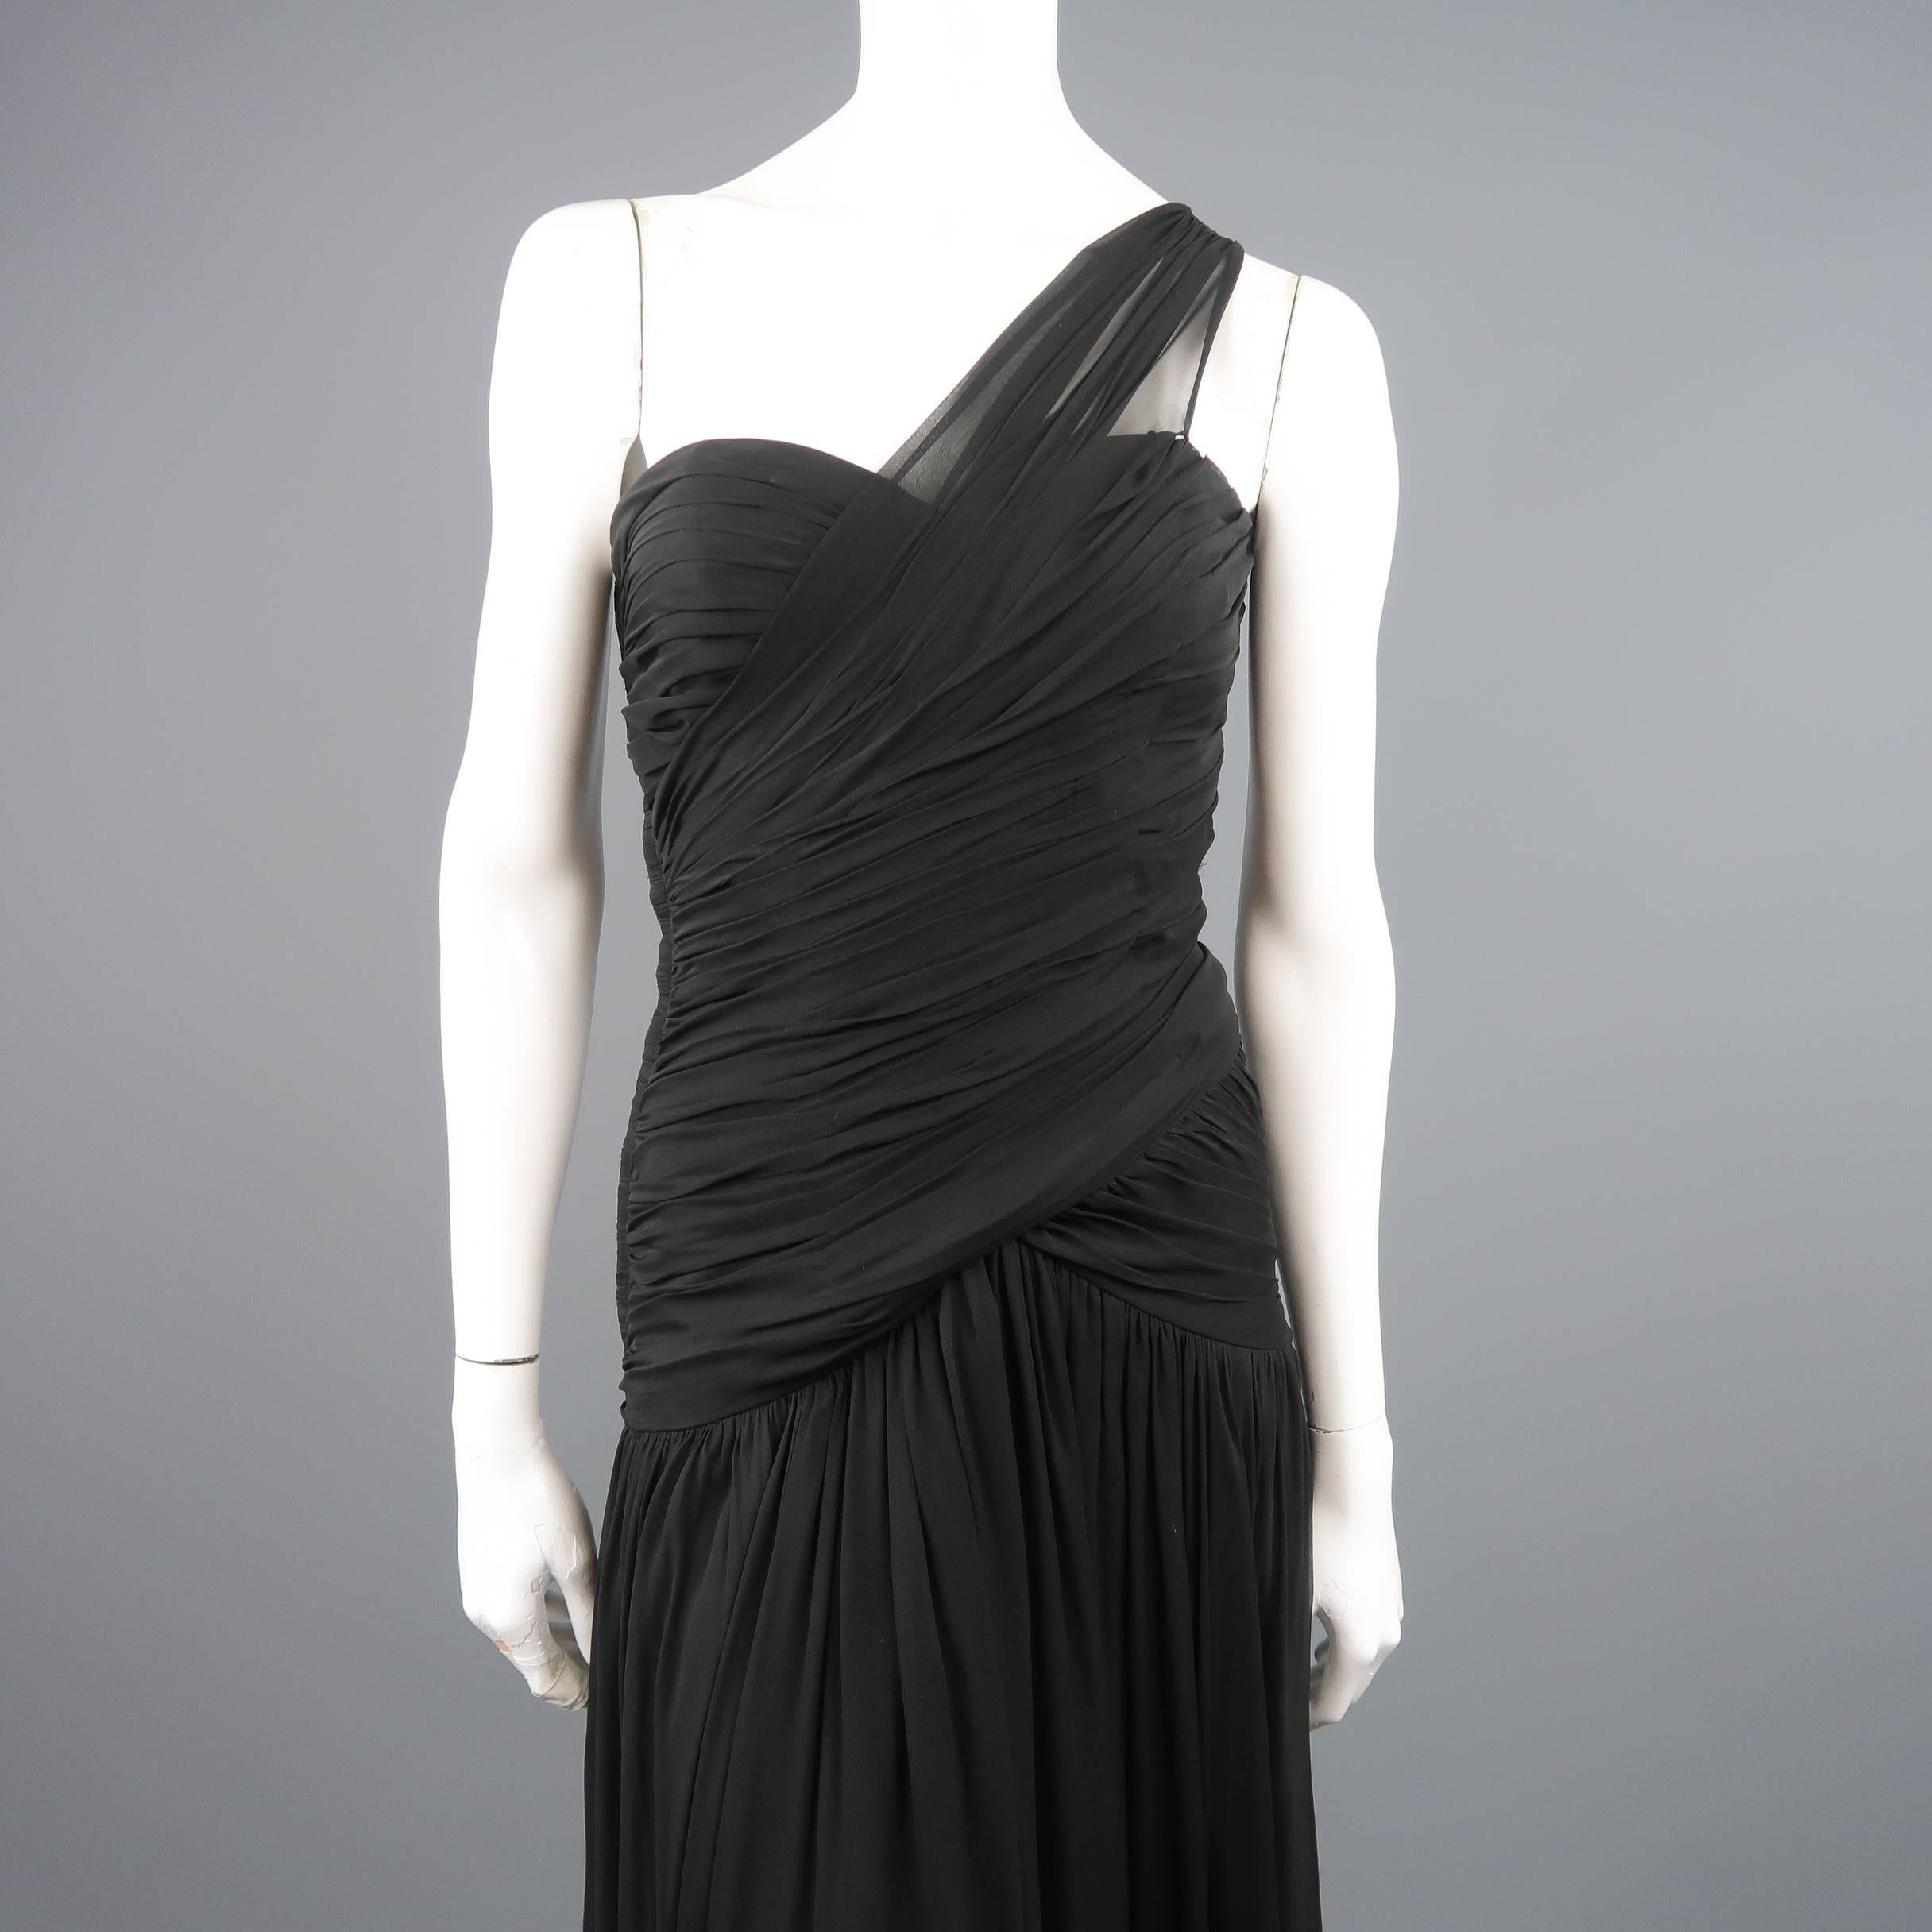 Vintage I. MAGNIN by ADELE SIMPSON cocktail dress comes in black silk chiffon and features a pleated bustier bodice with a sweetheart neckline, diagonal gathered shoulder strap, and long drop waist gathered skirt. Minor wear throughout. Made in